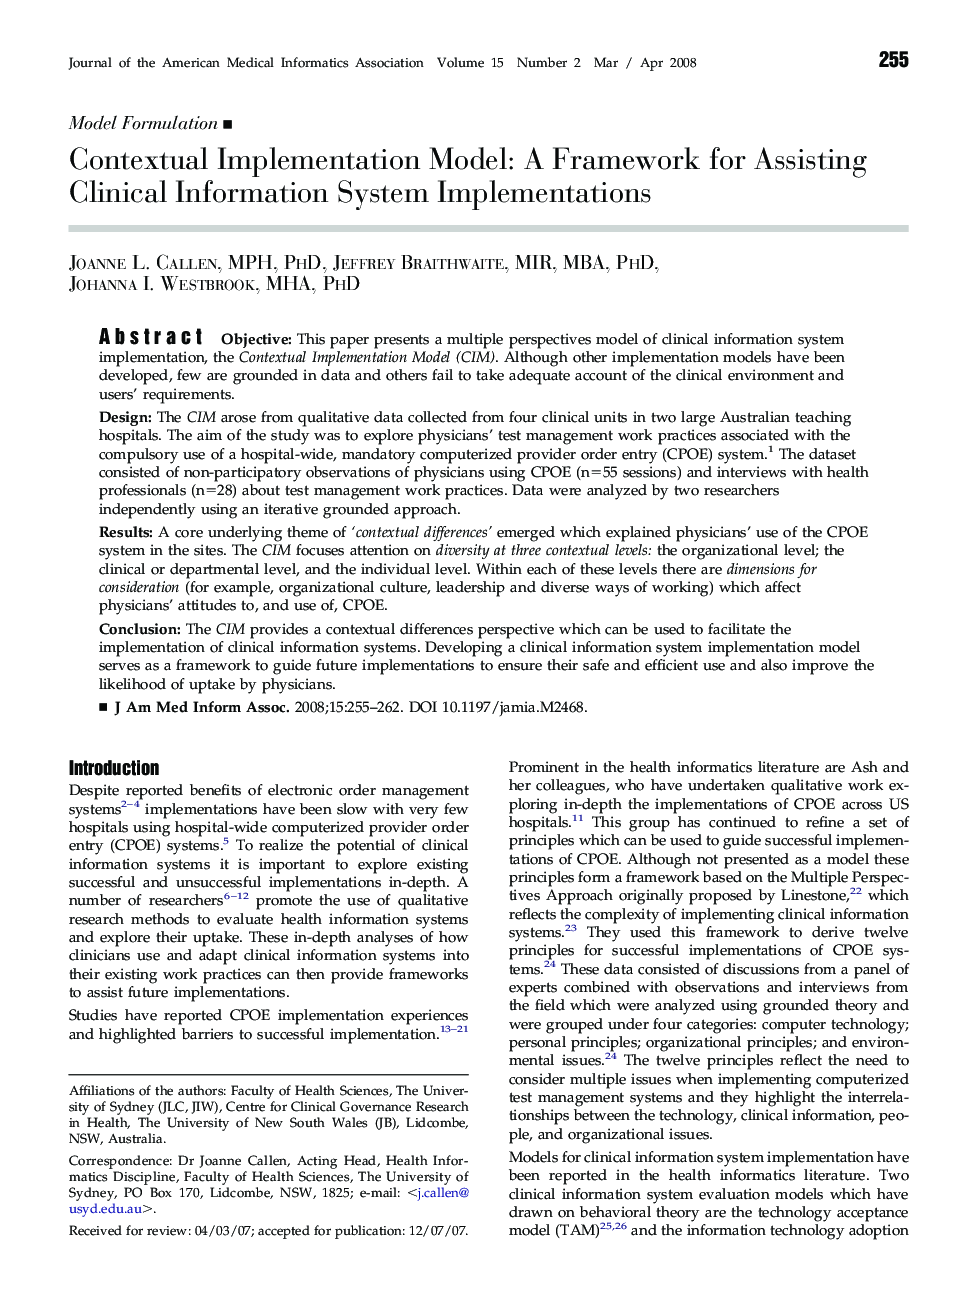 Contextual Implementation Model: A Framework for Assisting Clinical Information System Implementations